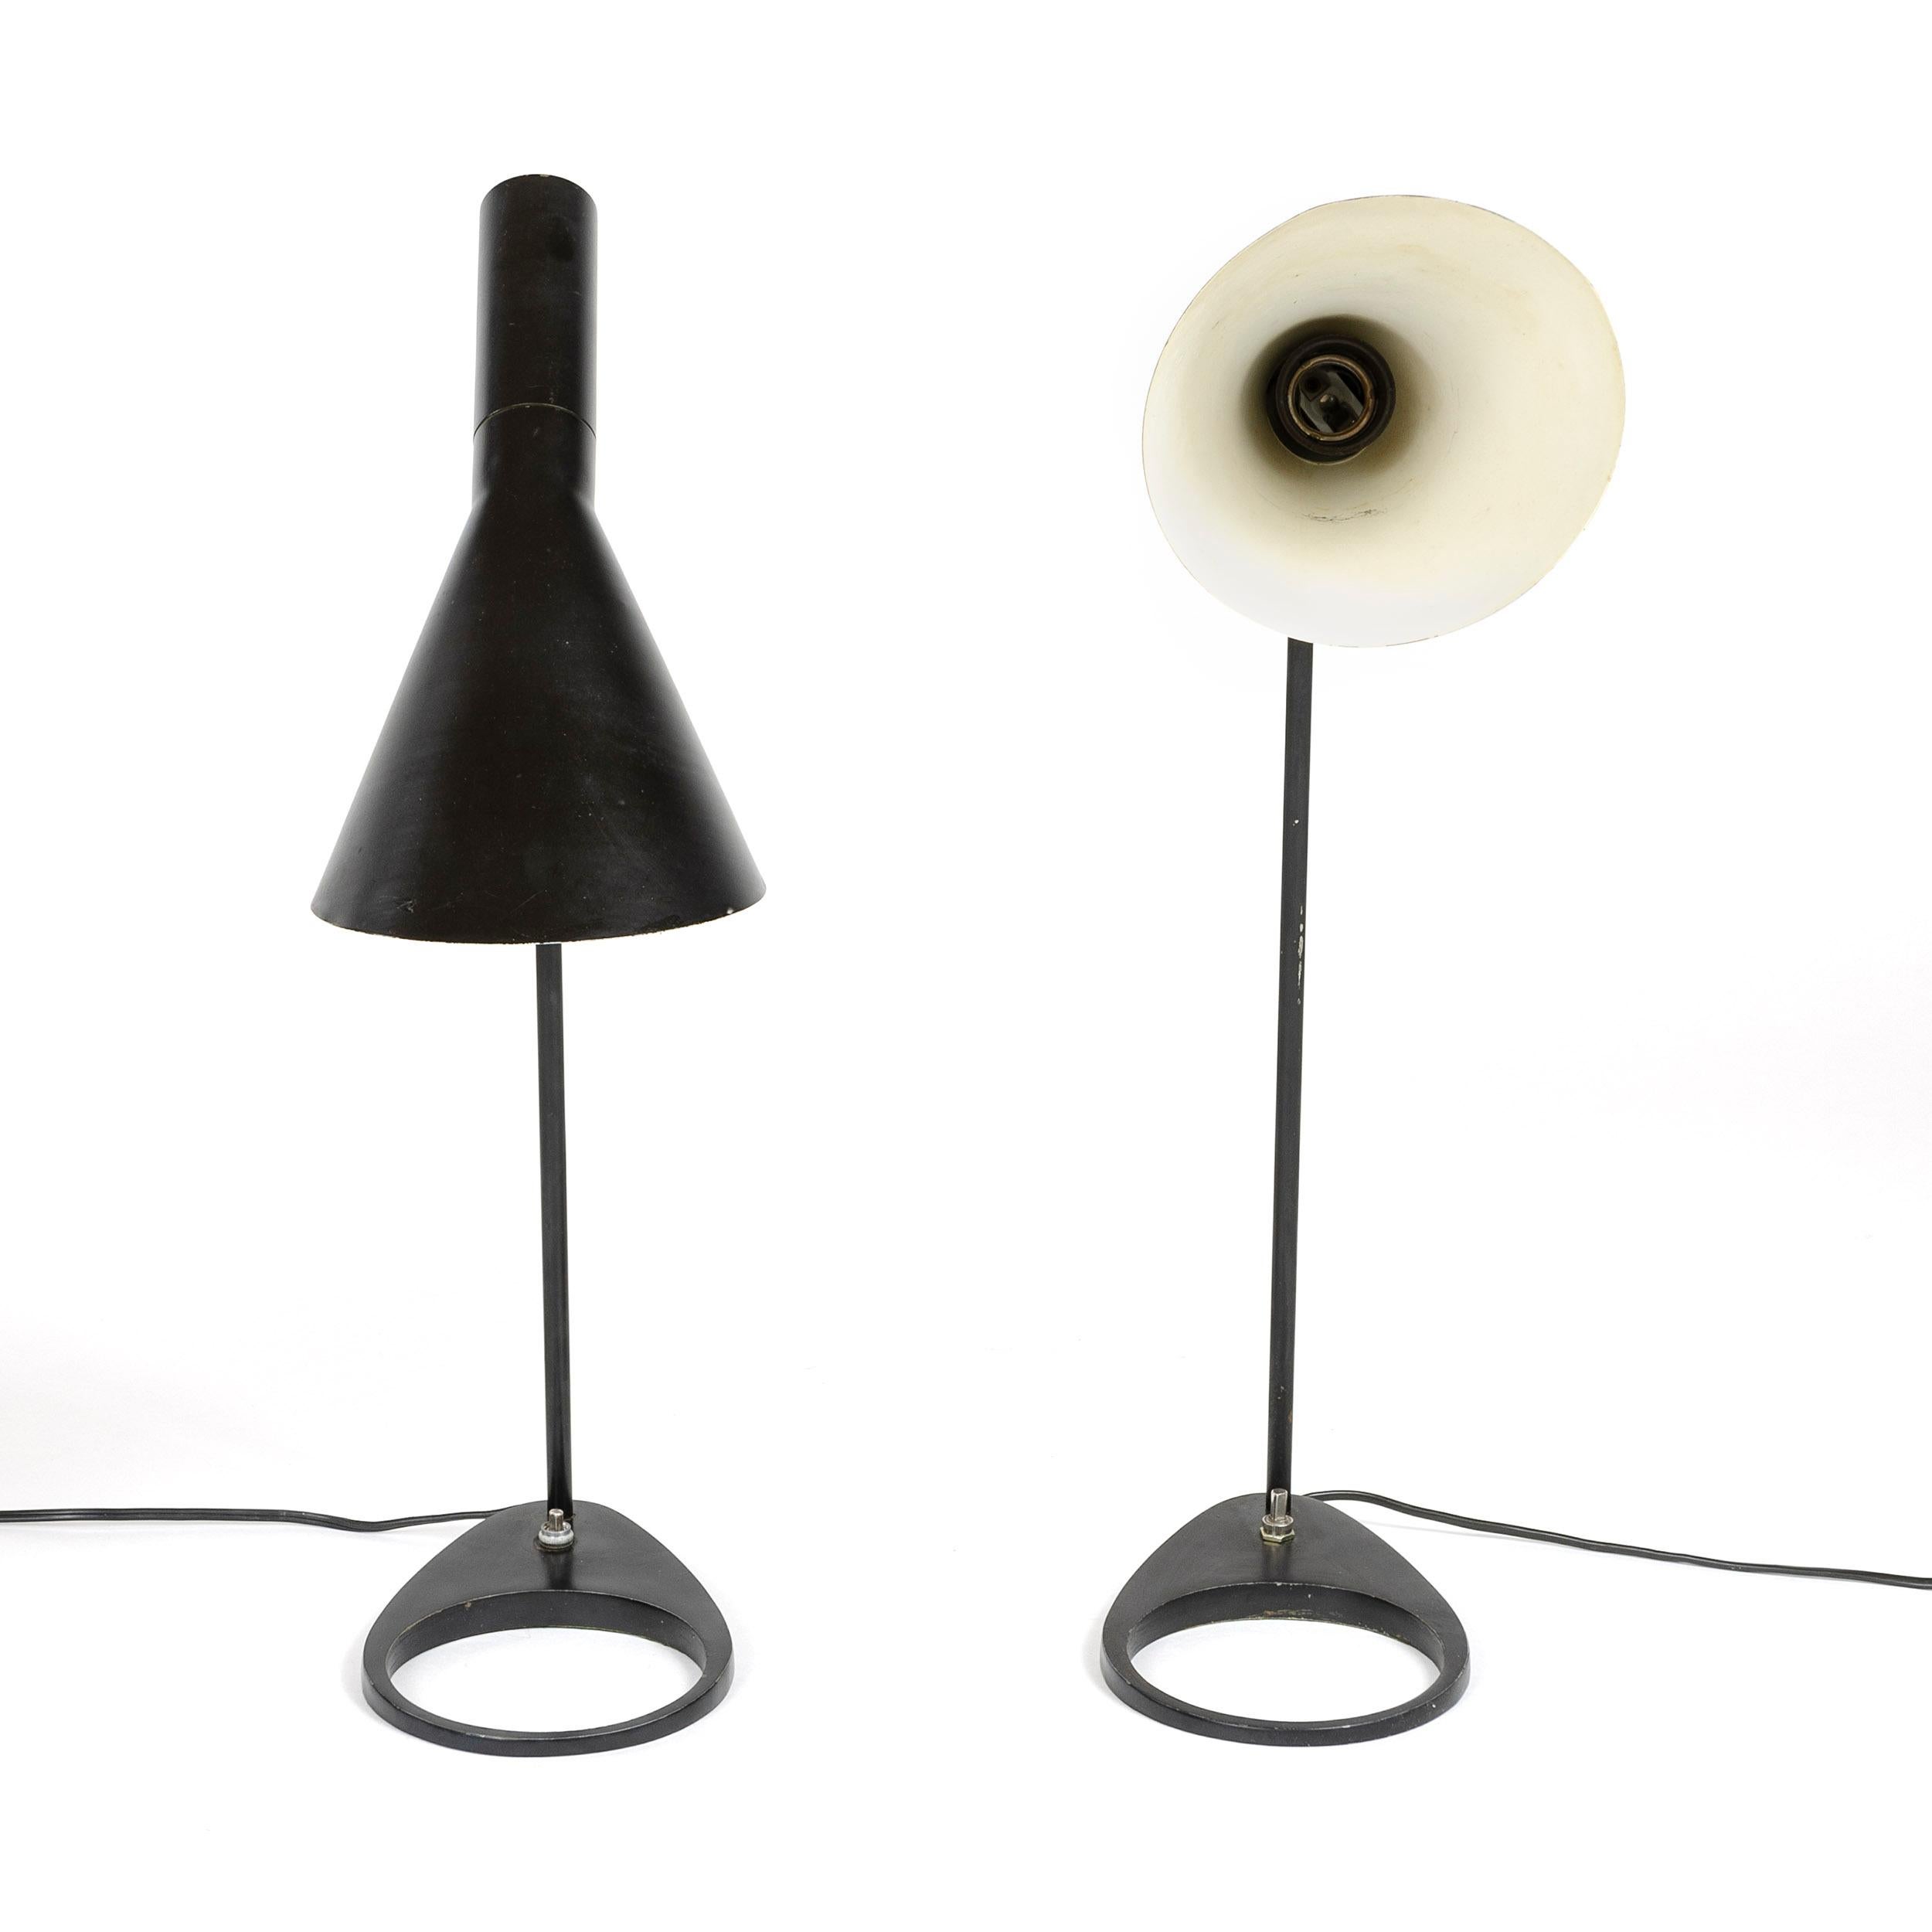 1960s Danish AJ Extra Large Desk Lamp by Arne Jacobsen for Louis Poulsen In Good Condition For Sale In Sagaponack, NY